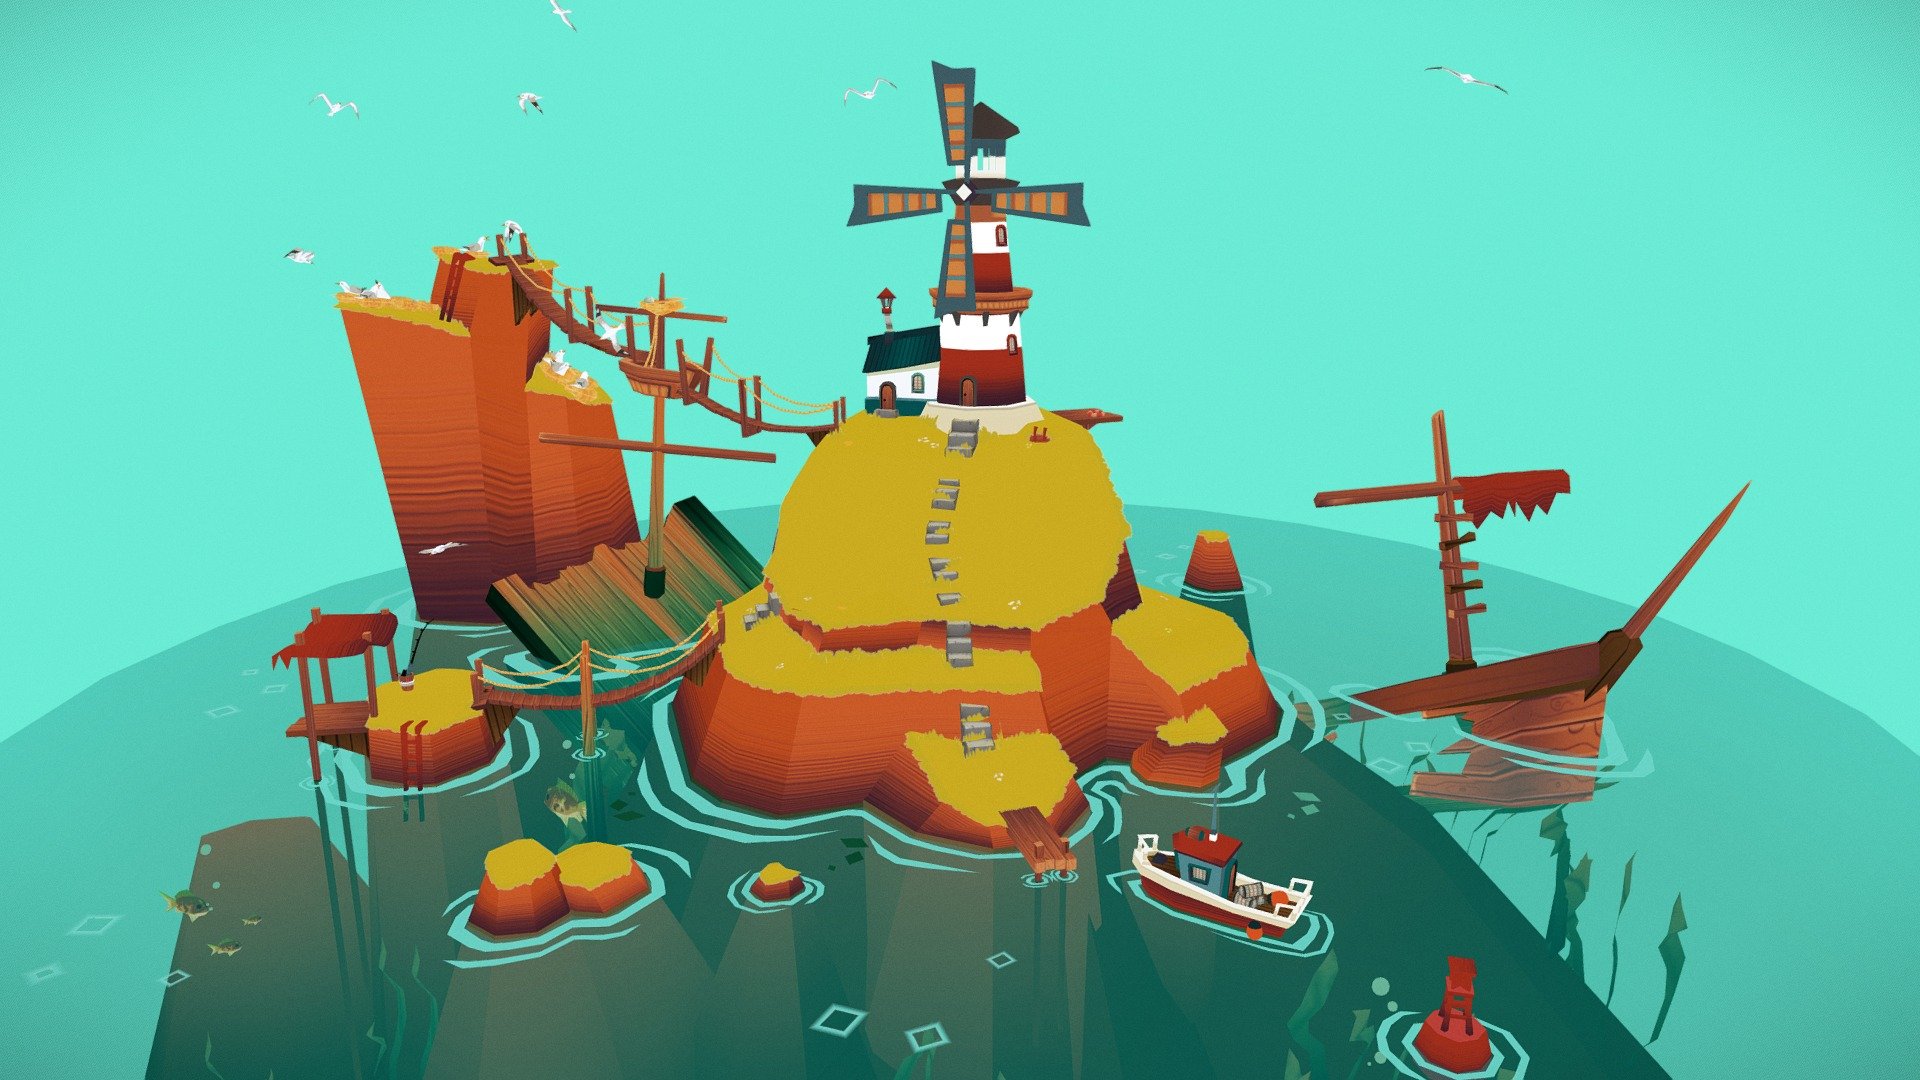 My submission for the first Low Poly challenge of 2021!

The combined lighthouse and windmill provides the Lighthouse Keeper with an excellent view of the surrounding reef, unfortunately it lighthouse no longer works as intended, meaning there have been a few&hellip; mishaps over the years. Though we are assured that it certainly wasn't the Keeper's intention! The crows nest provides a convenient way to cut across to get those fresh seagull eggs in the morning, and the diving platform provides a nice way to keep entertained through those hot summer days.

There's plenty to do and see - a fishing platform, covered to keep you protected from the midday sun, the odd wreck and legend has it there's a treasure chest that's been pulled on shore! 

All my own concepts, designs, modelling and texturing 3d model